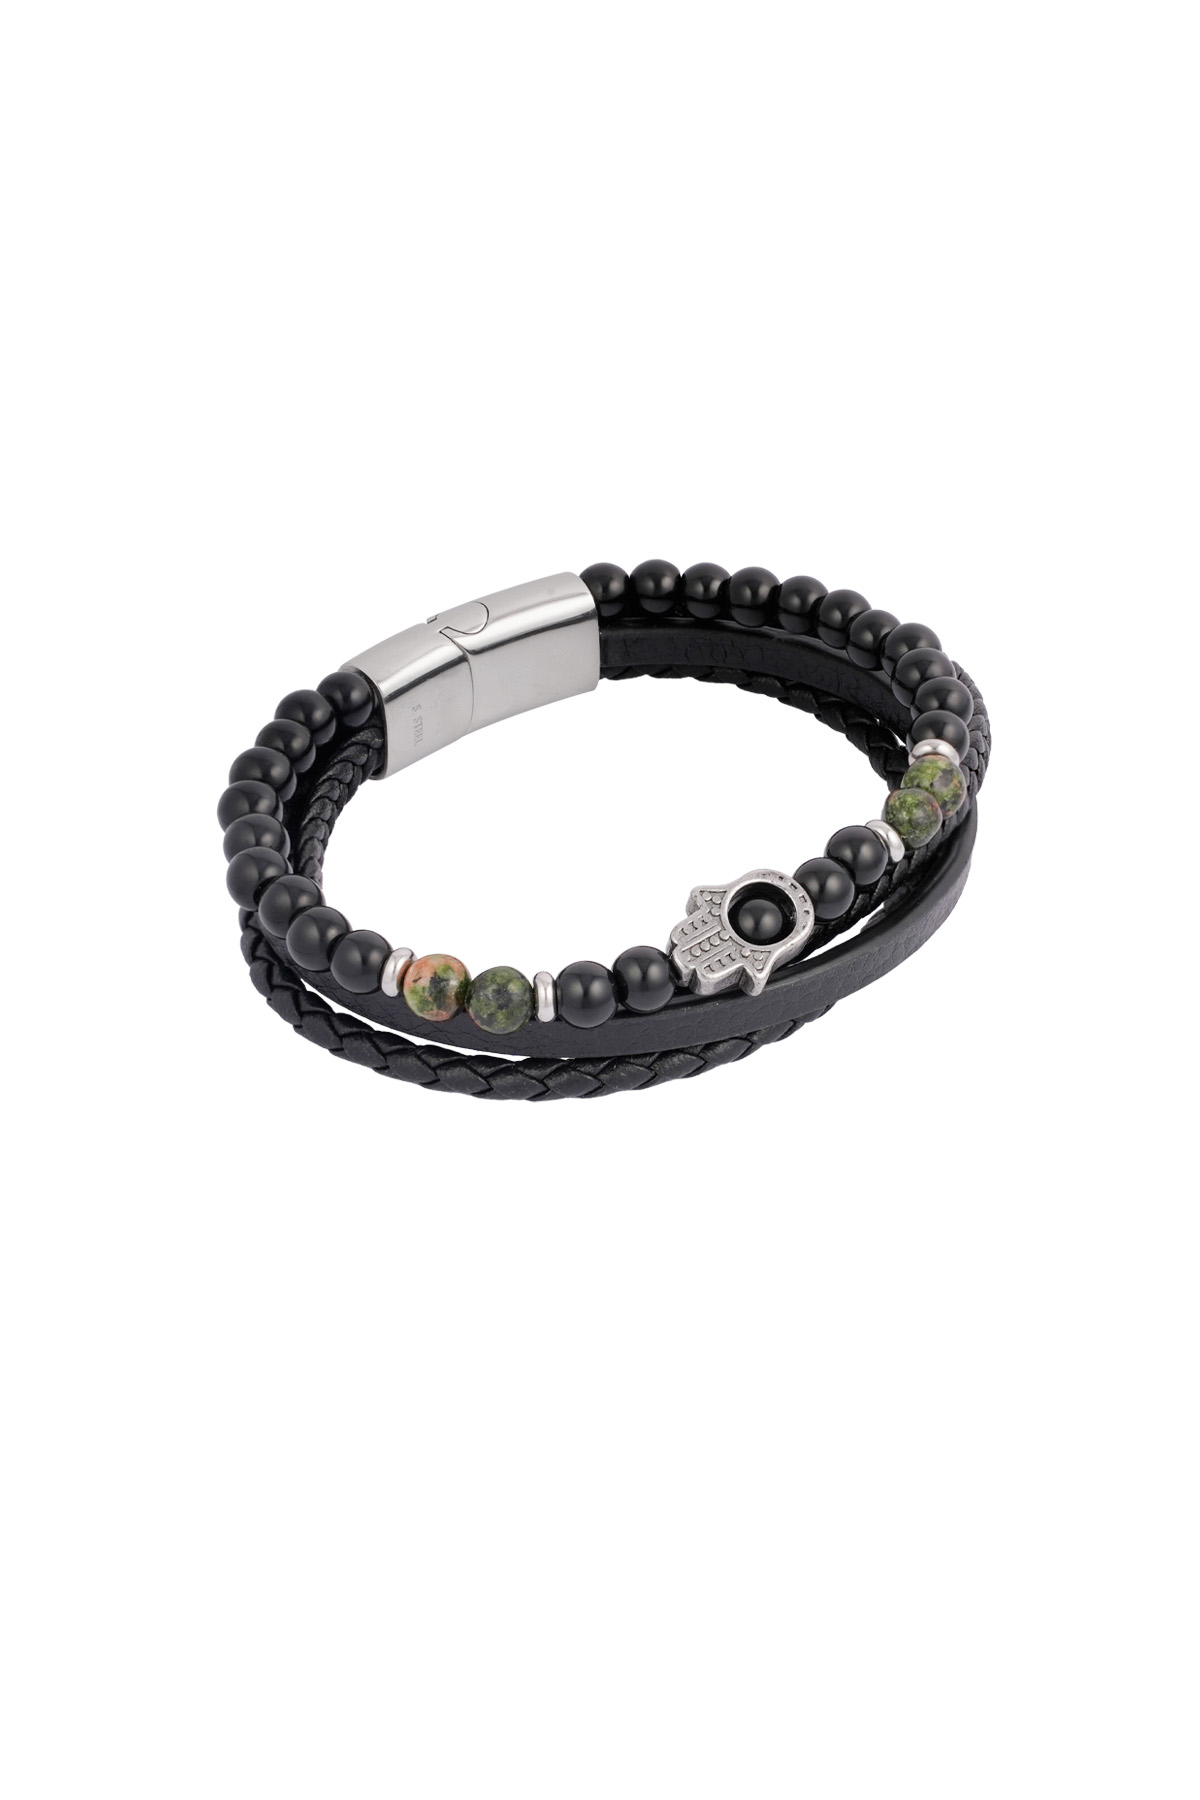 Double men's bracelet with hand charm - Brown Black Picture6